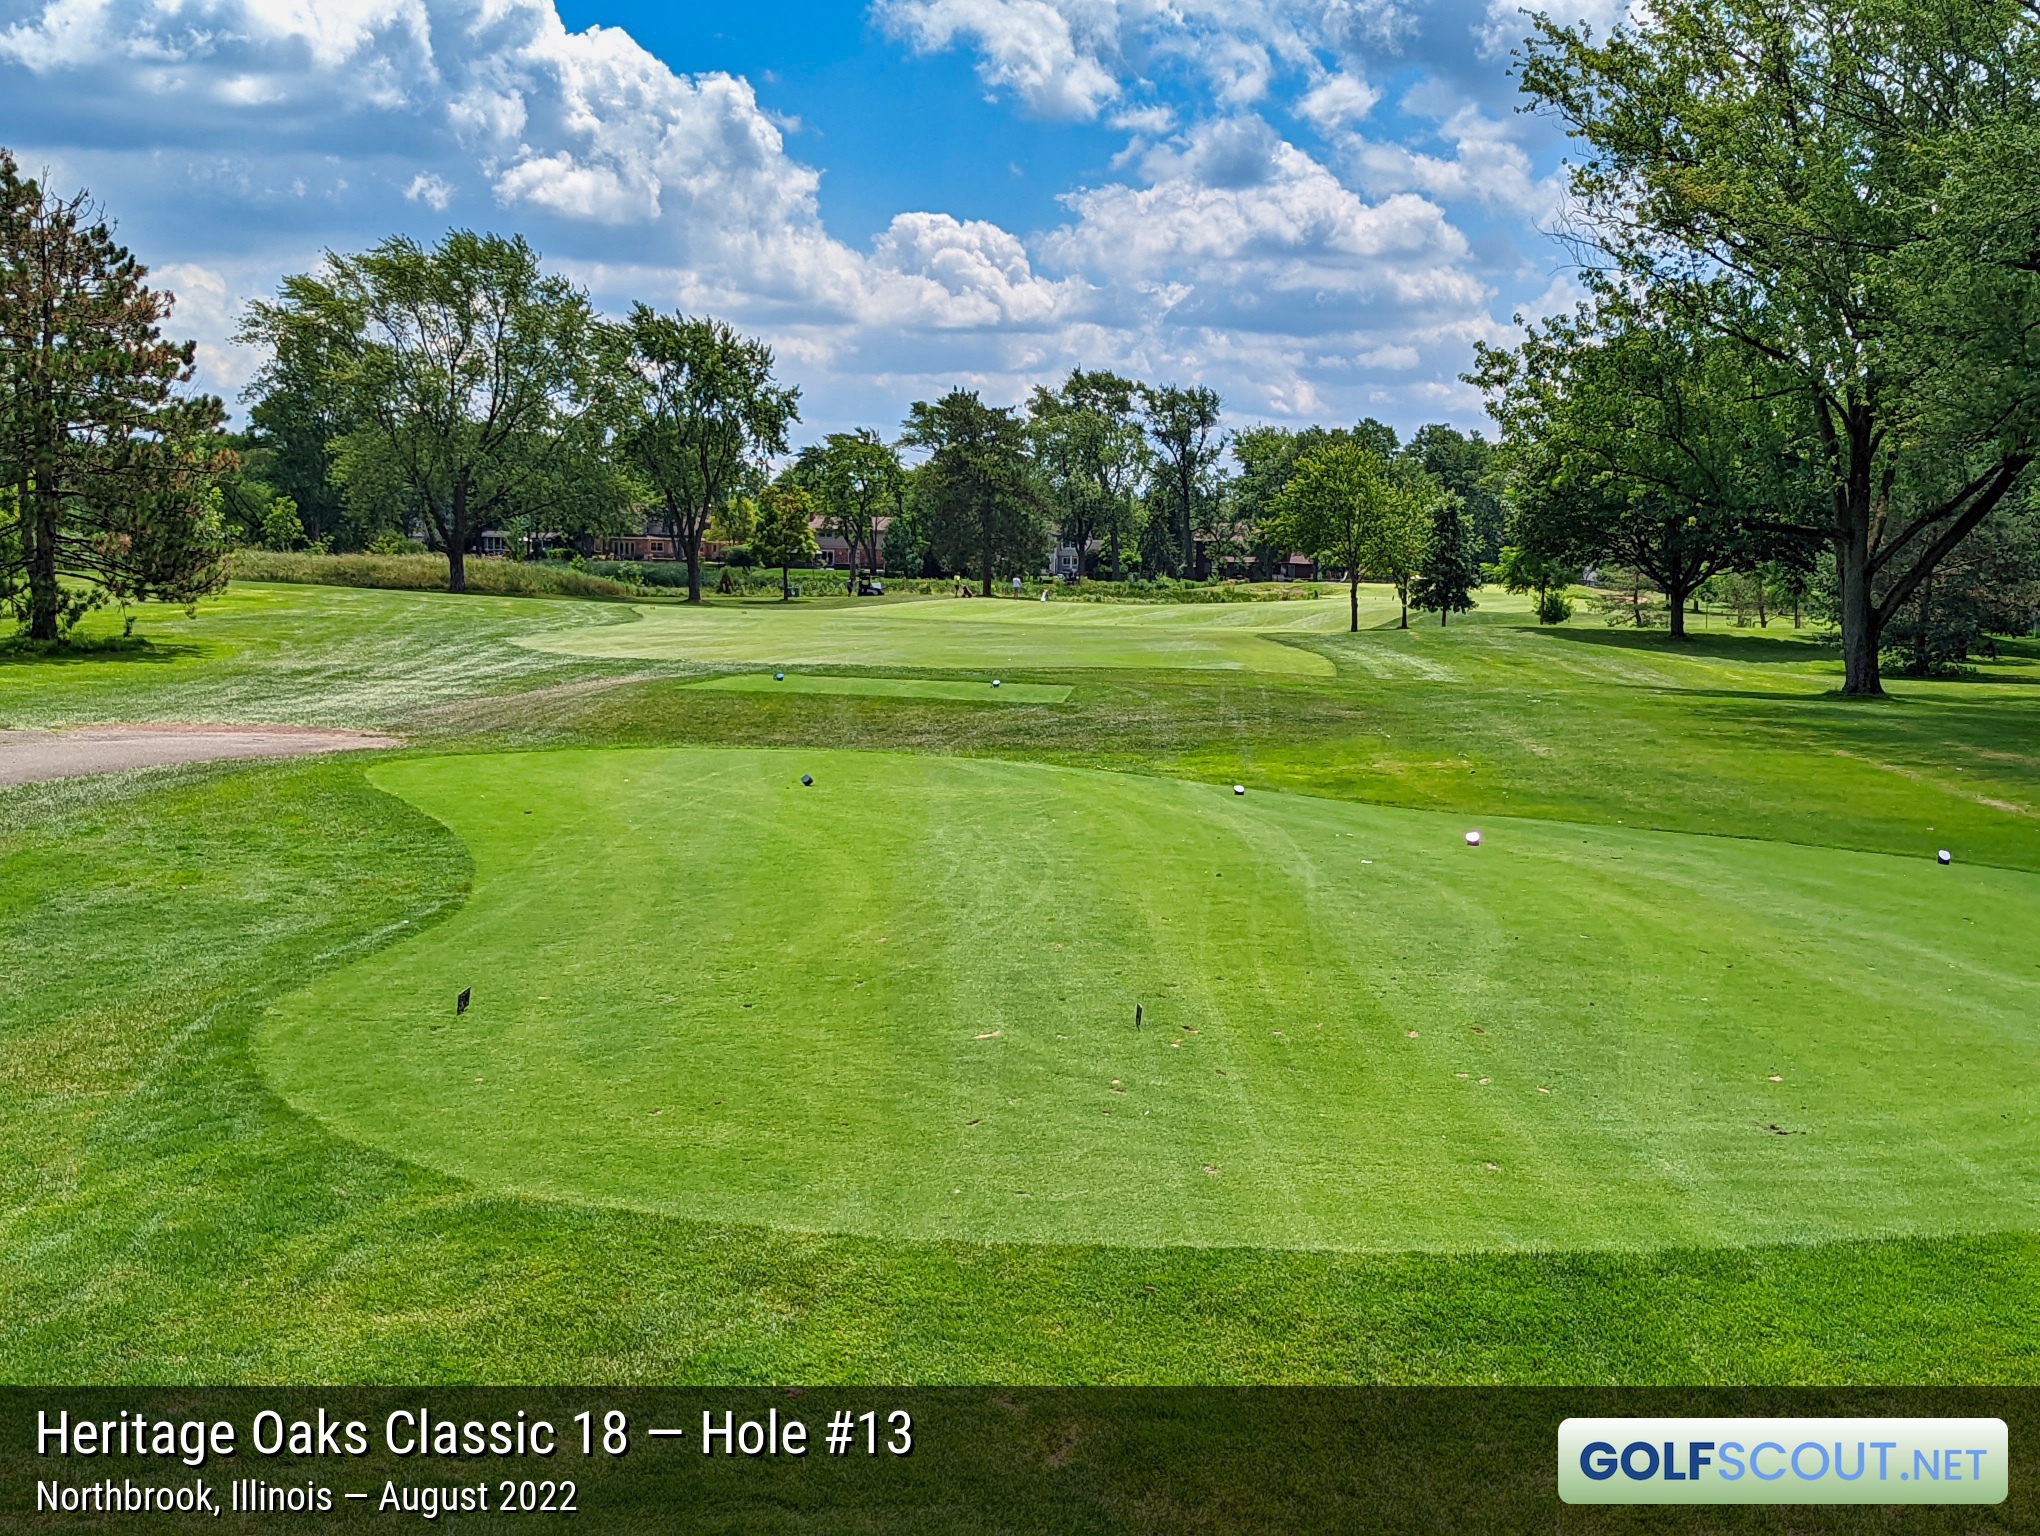 Photo of hole #13 at Heritage Oaks Golf Club - Classic 18 in Northbrook, Illinois. 